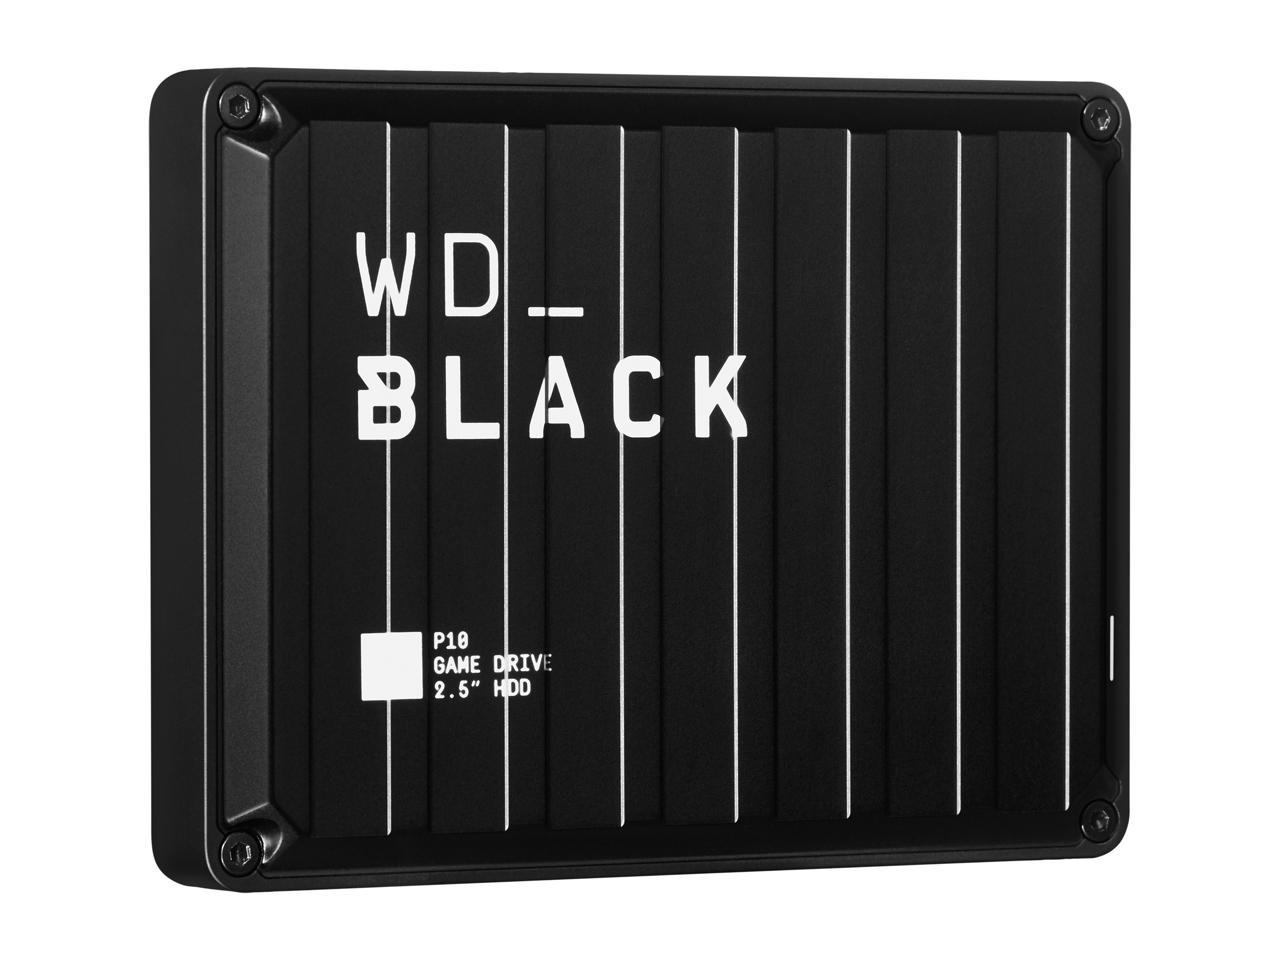 Wd Black 5Tb P10 Game Drive Portable External Hard Drive For Ps5/Ps4/Xbox One/Pc/Mac Usb 3.2 (Wdba3A0050Bbk-Wesn)